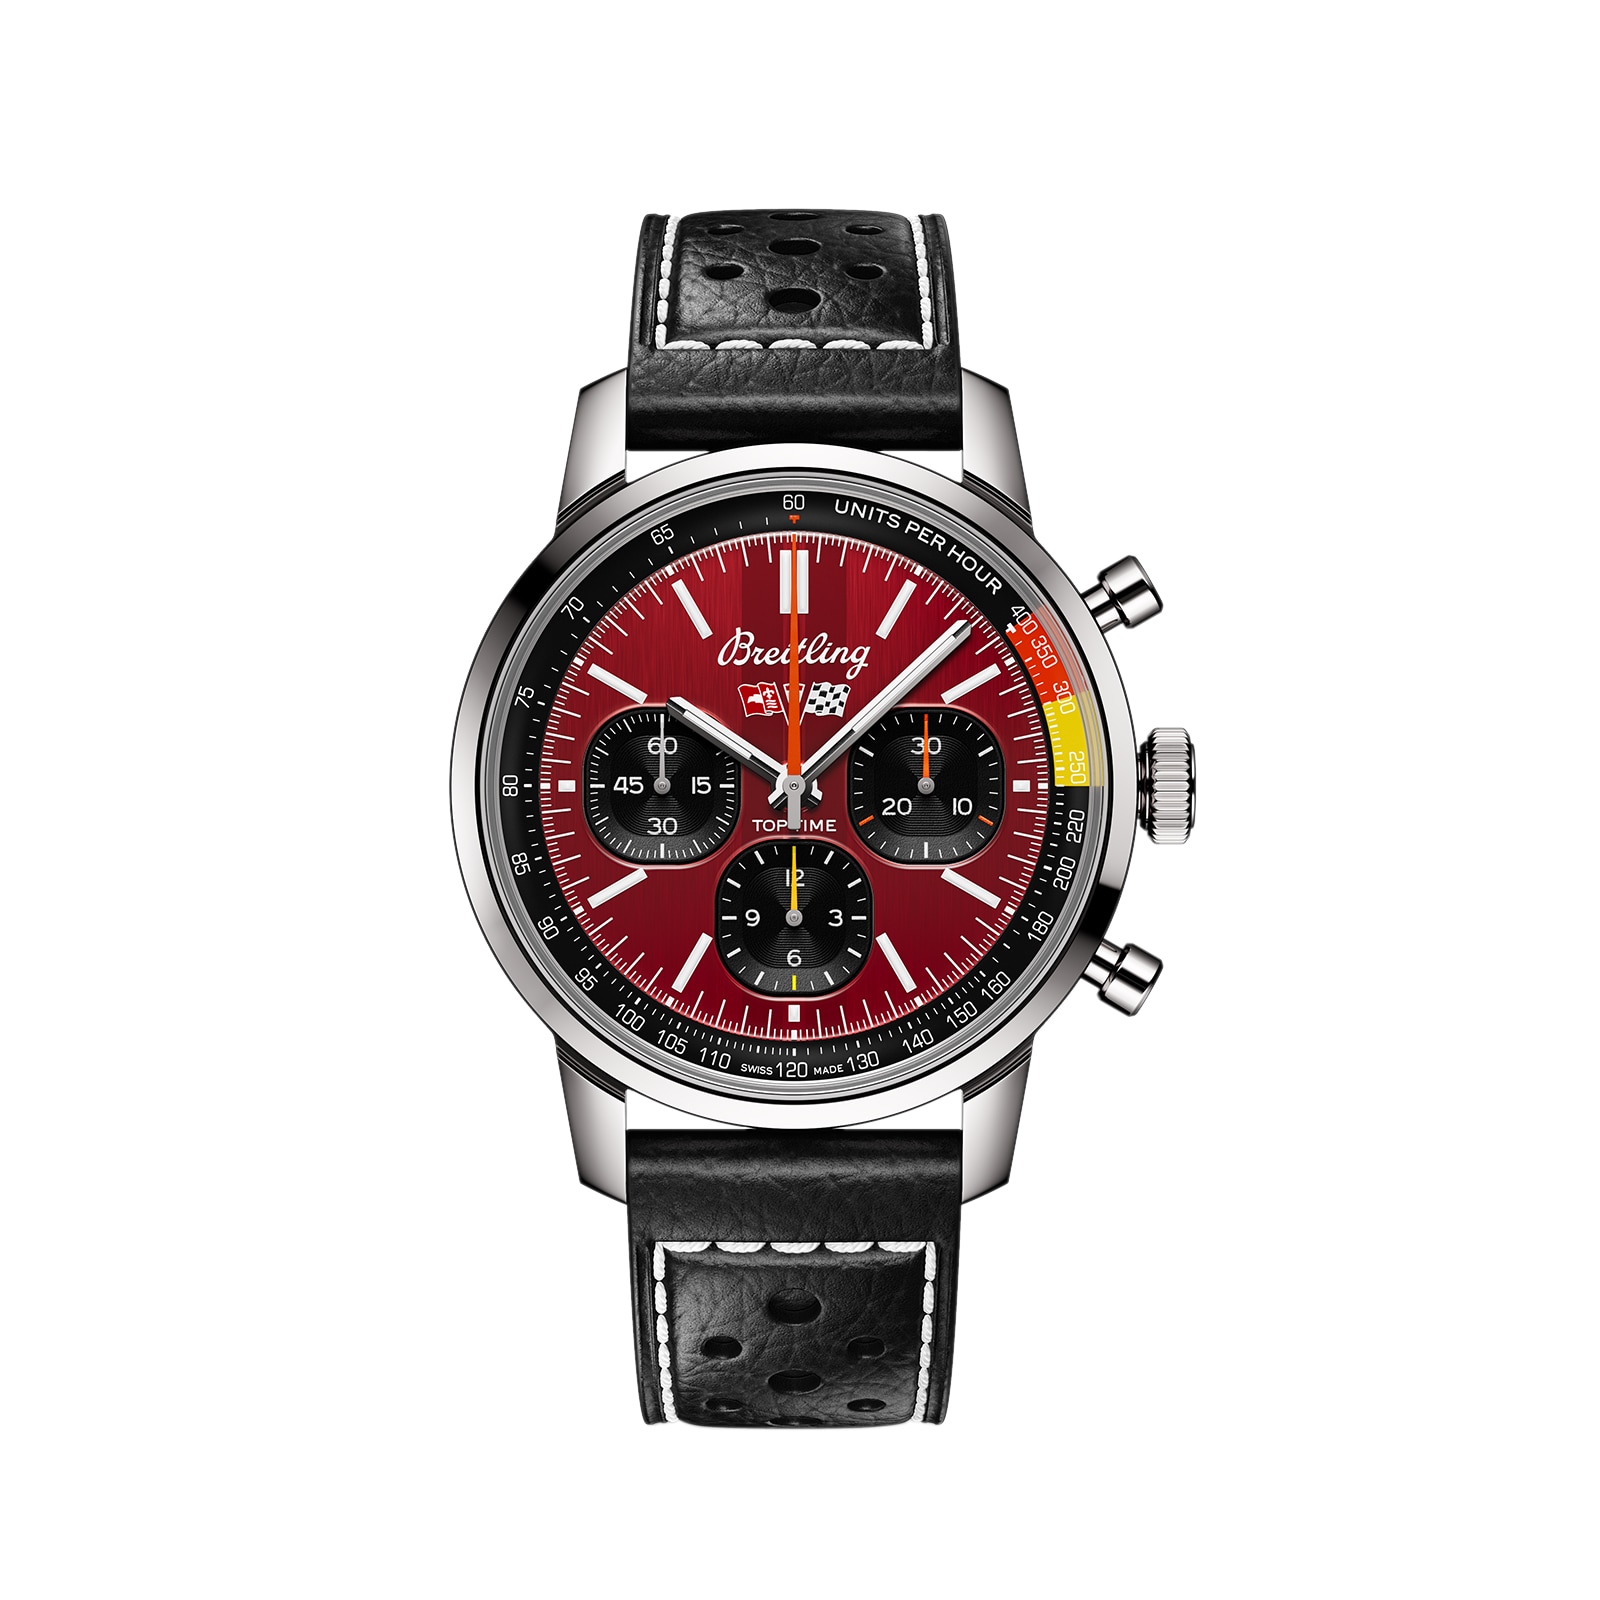 Breitling watch red dial black leather strap